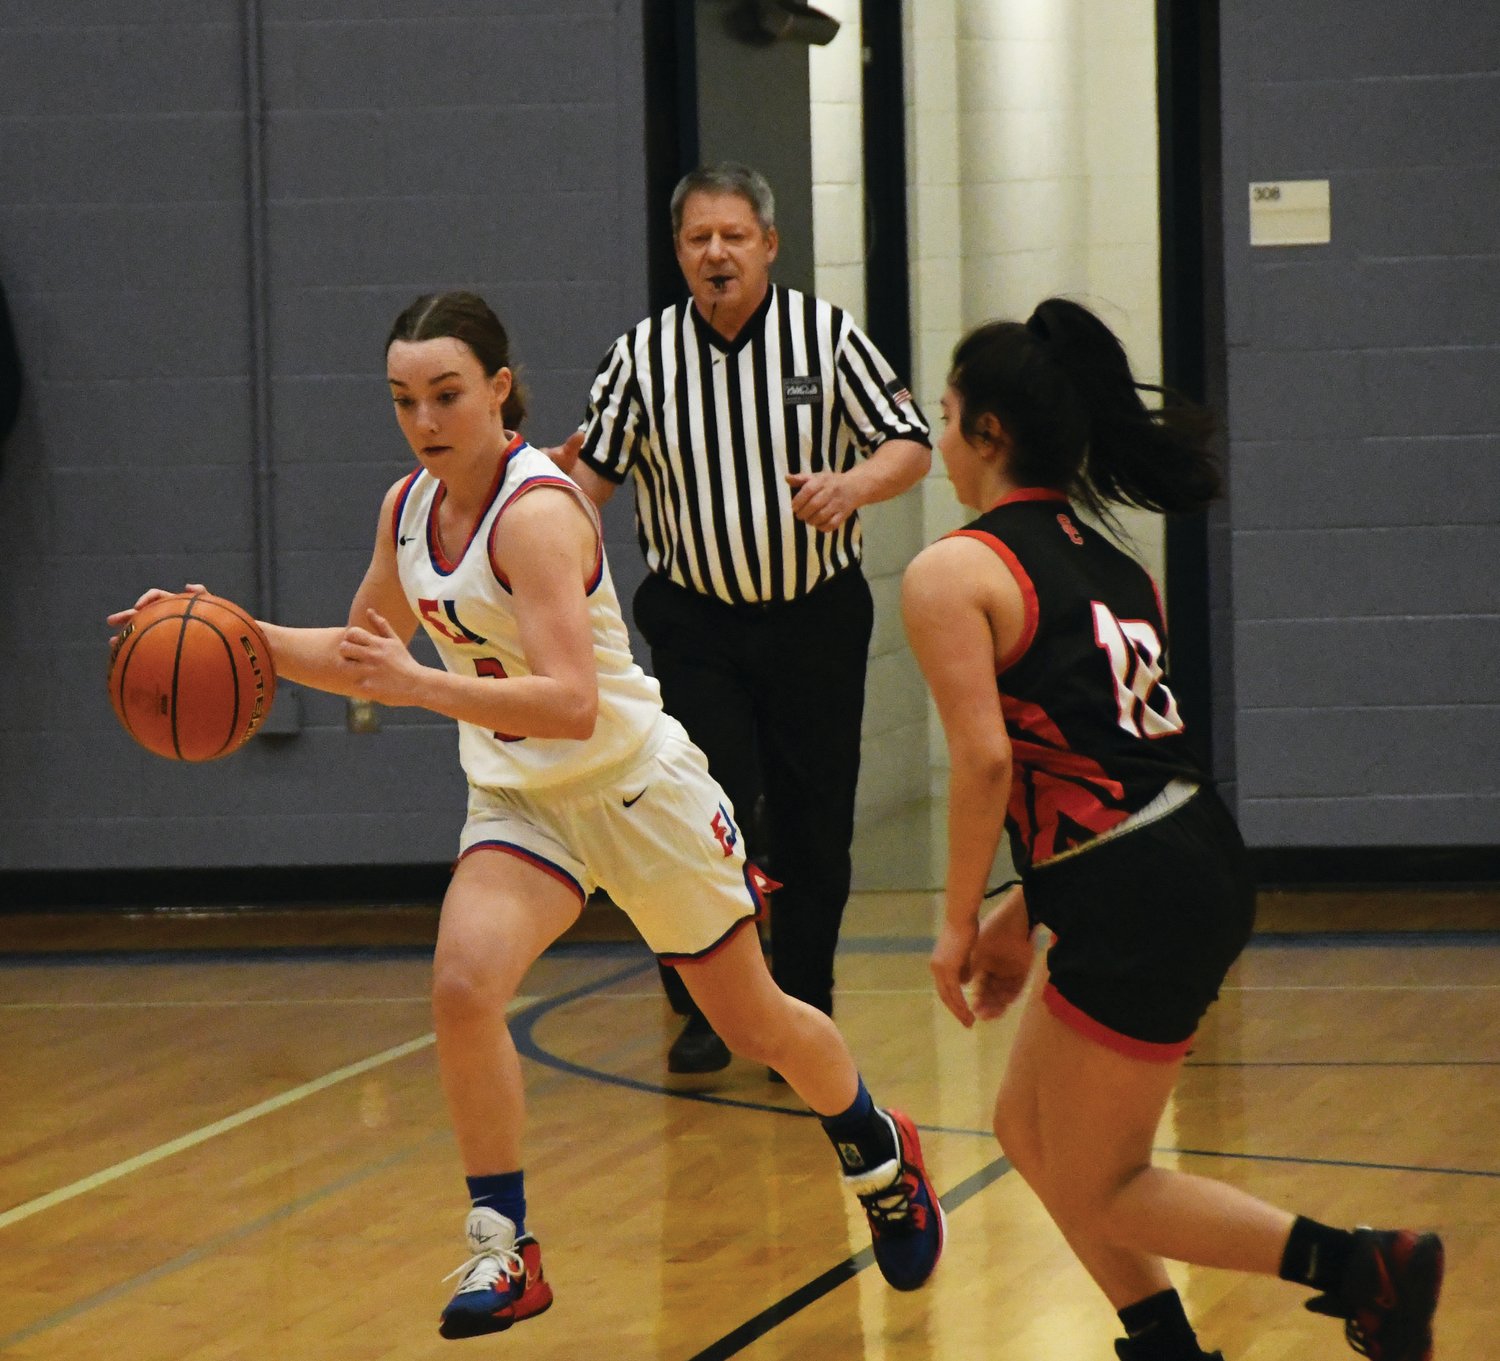 Sophomore guard Kay Botkin dashes up the court, looking to feed the ball to her teammates. Botkin lead her squad in scoring, with 10 points and three assists.